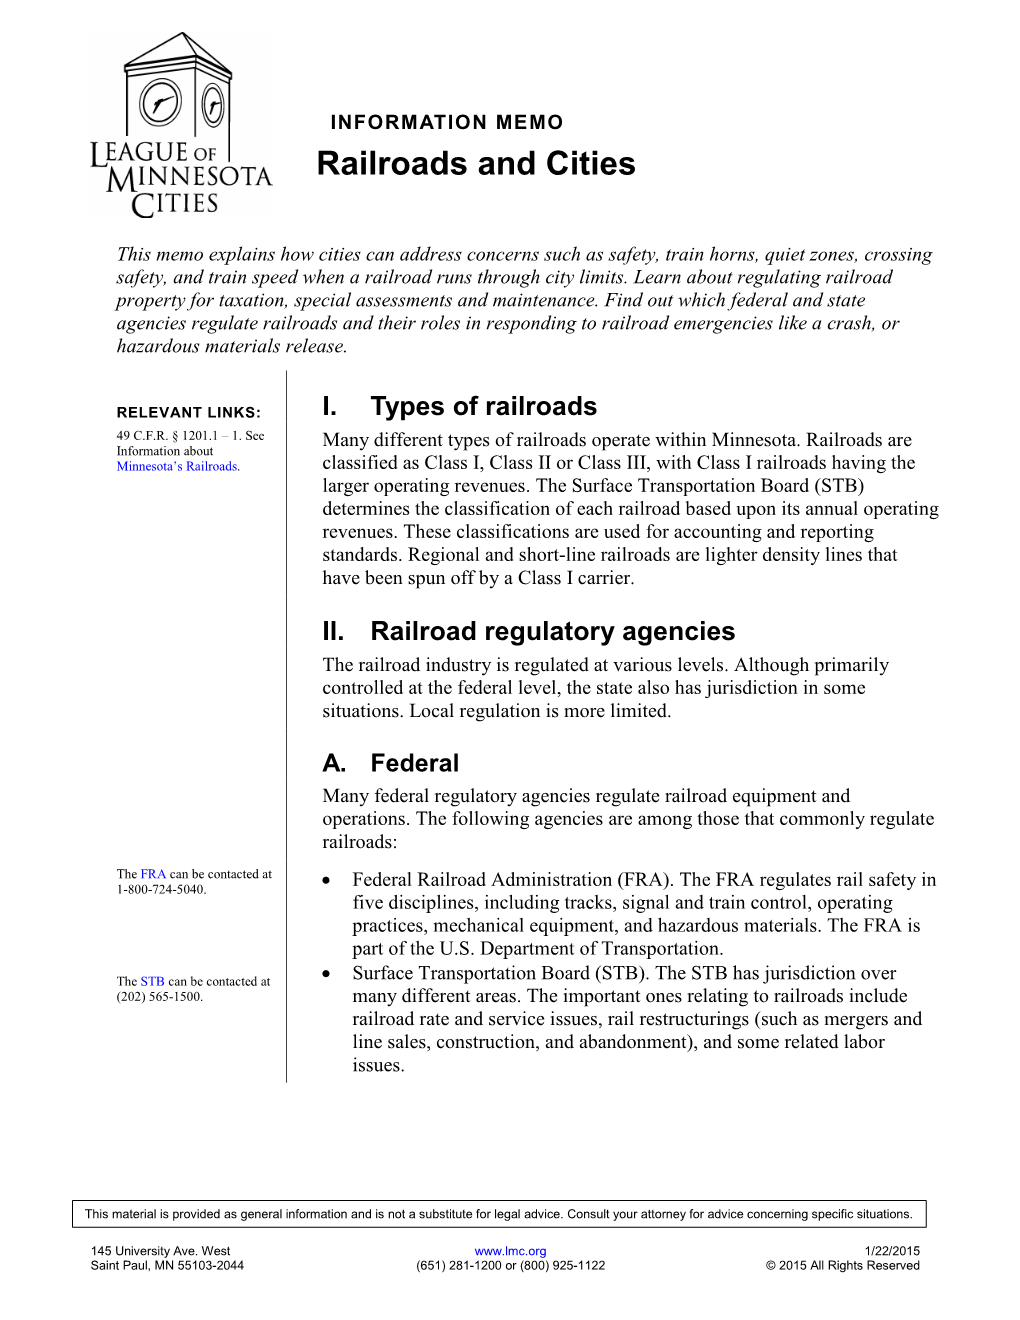 League of Minnesota Cities Information Memo on Railroads And